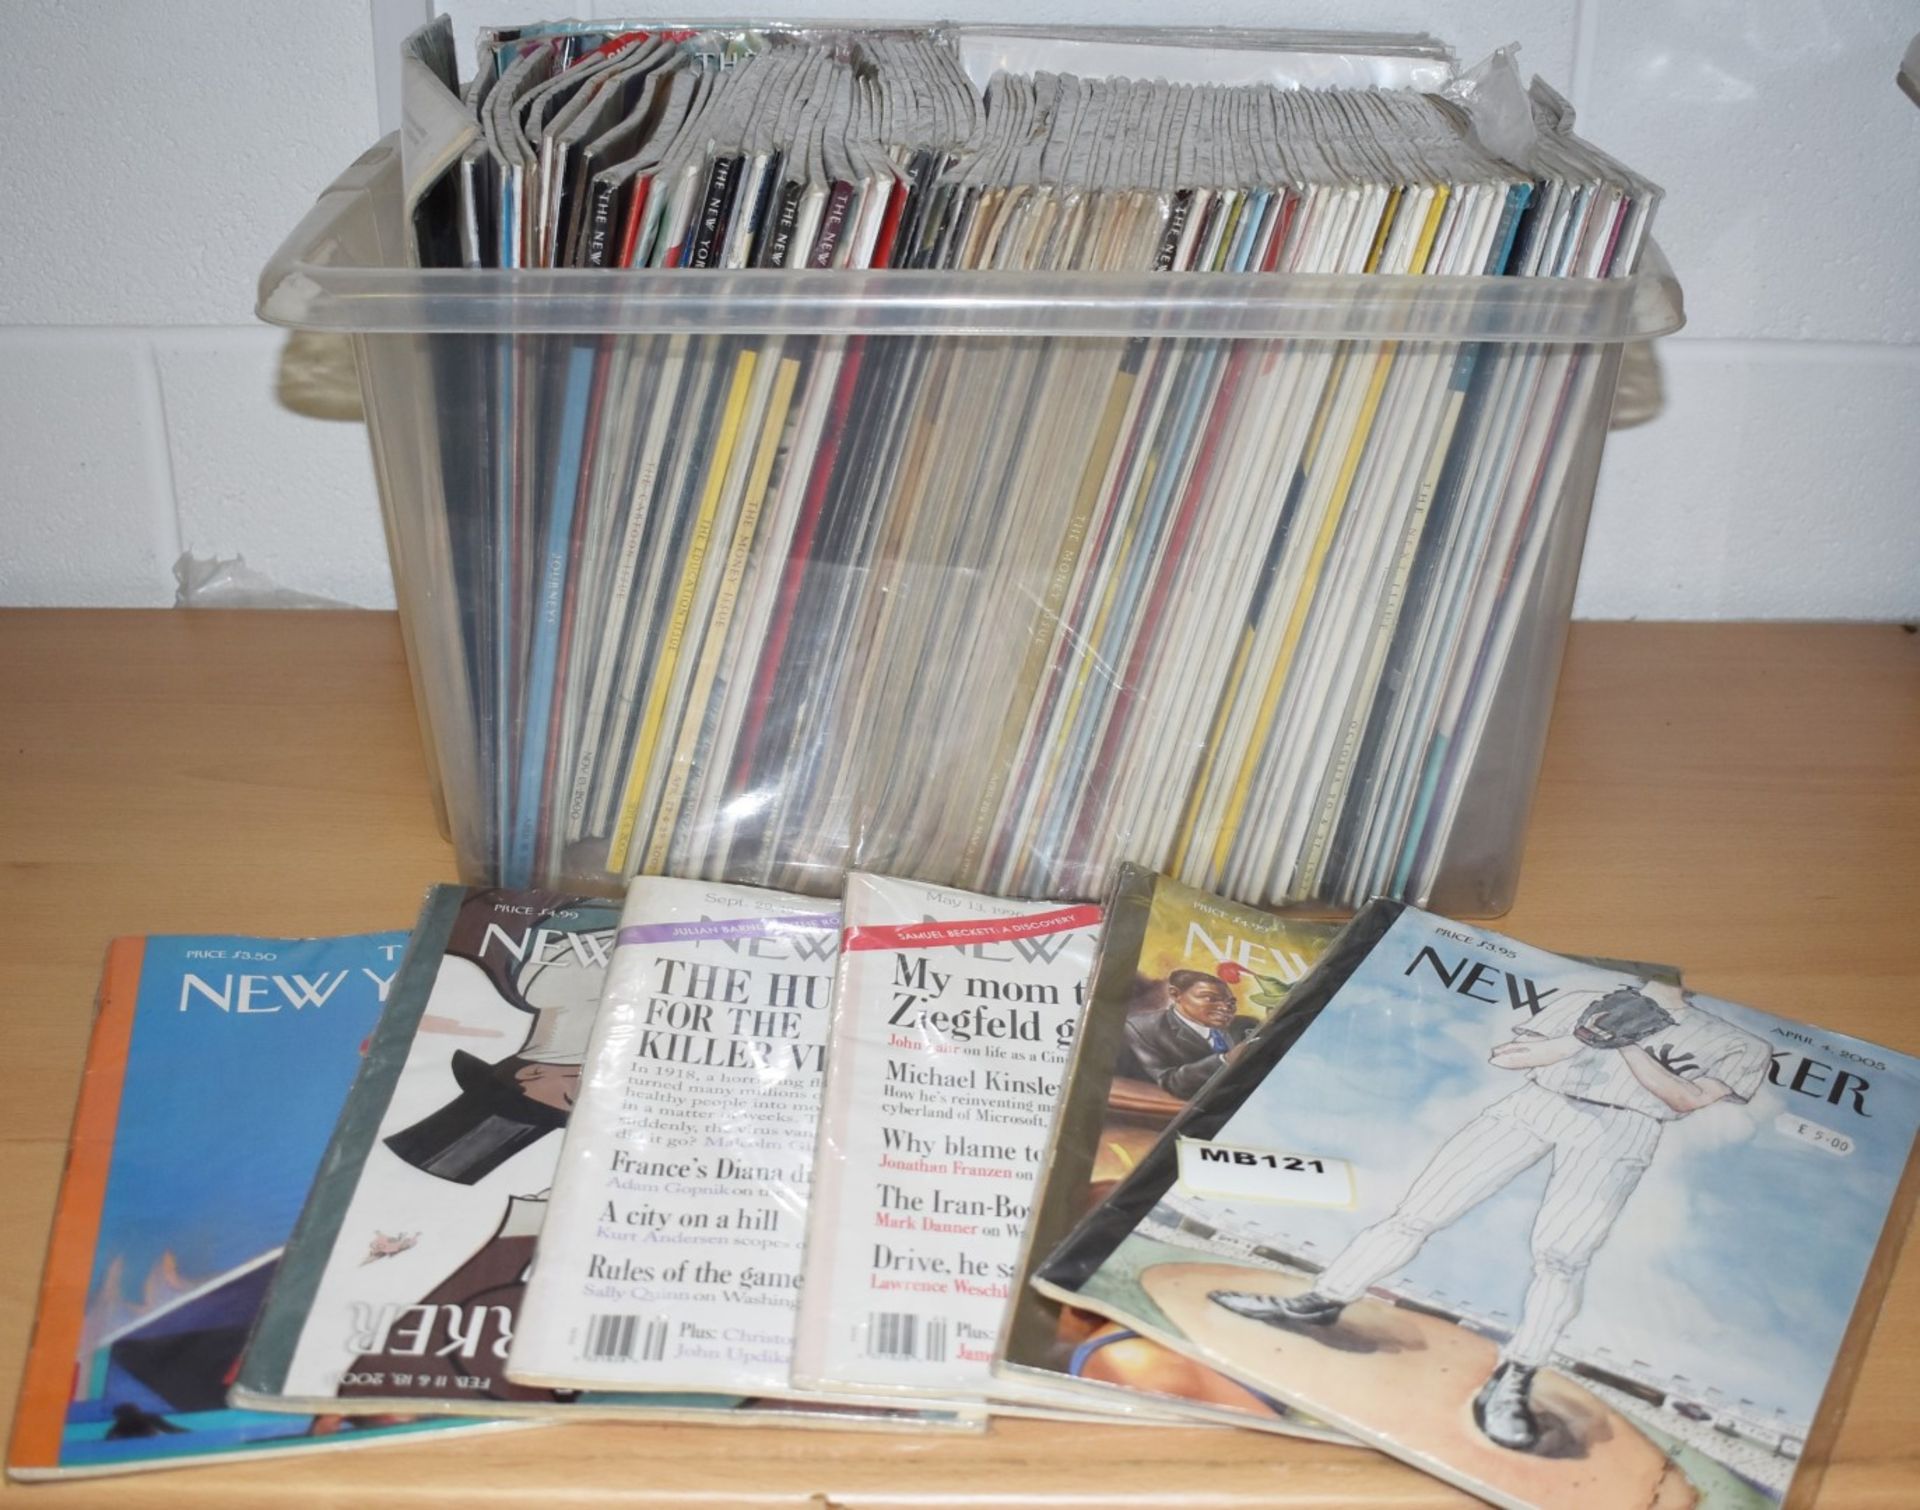 112 x New Yorker Magazines Dated 1997 to 2006 - Ref MB121 - CL431 - Location: Altrincham WA14 - Image 3 of 4